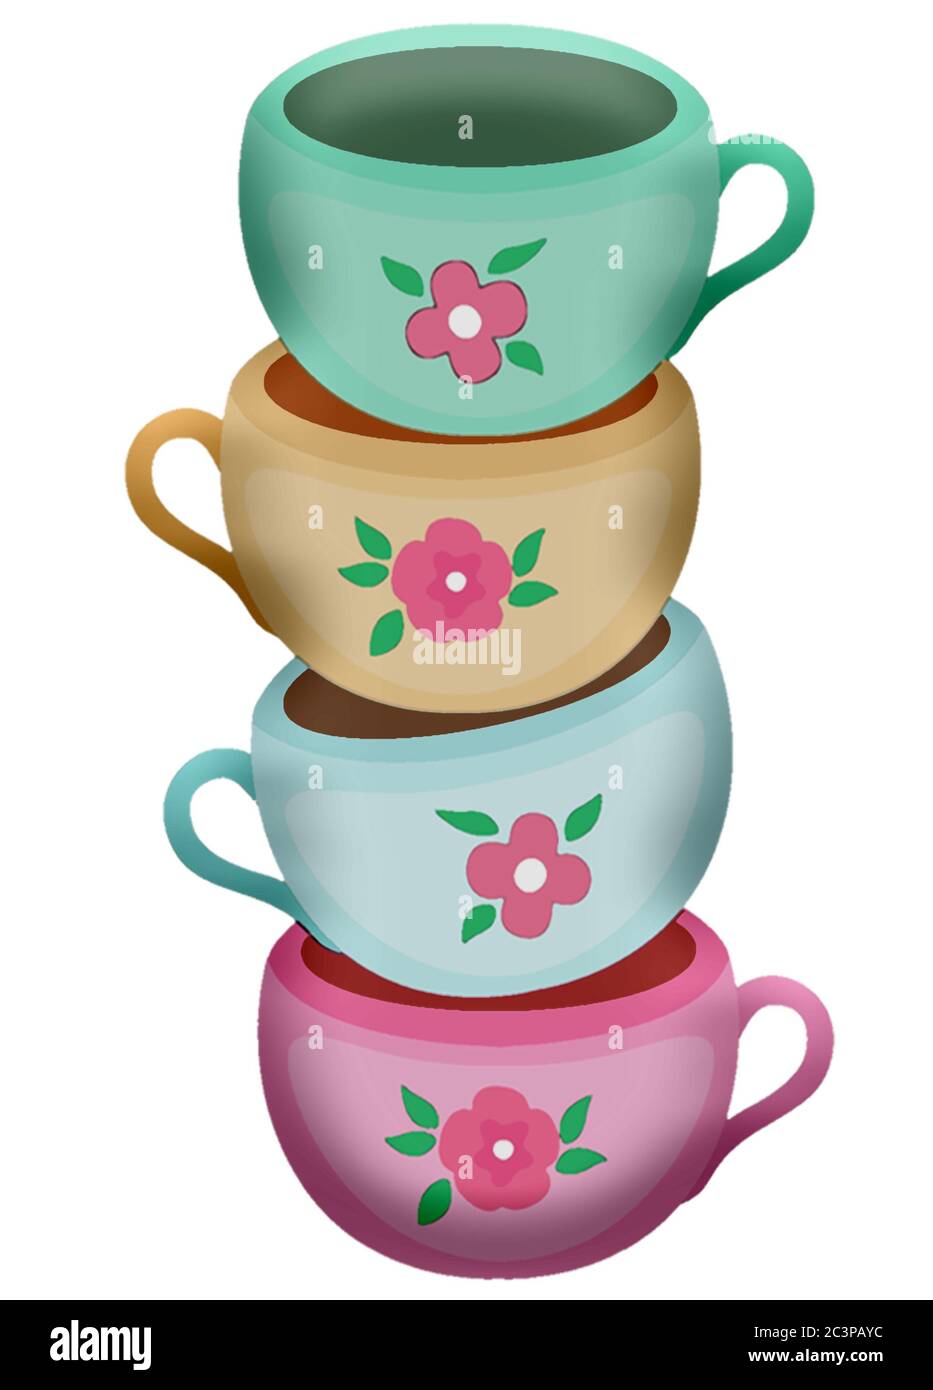 An illustration of colorful cups on top of each other isolated on a white background Stock Photo